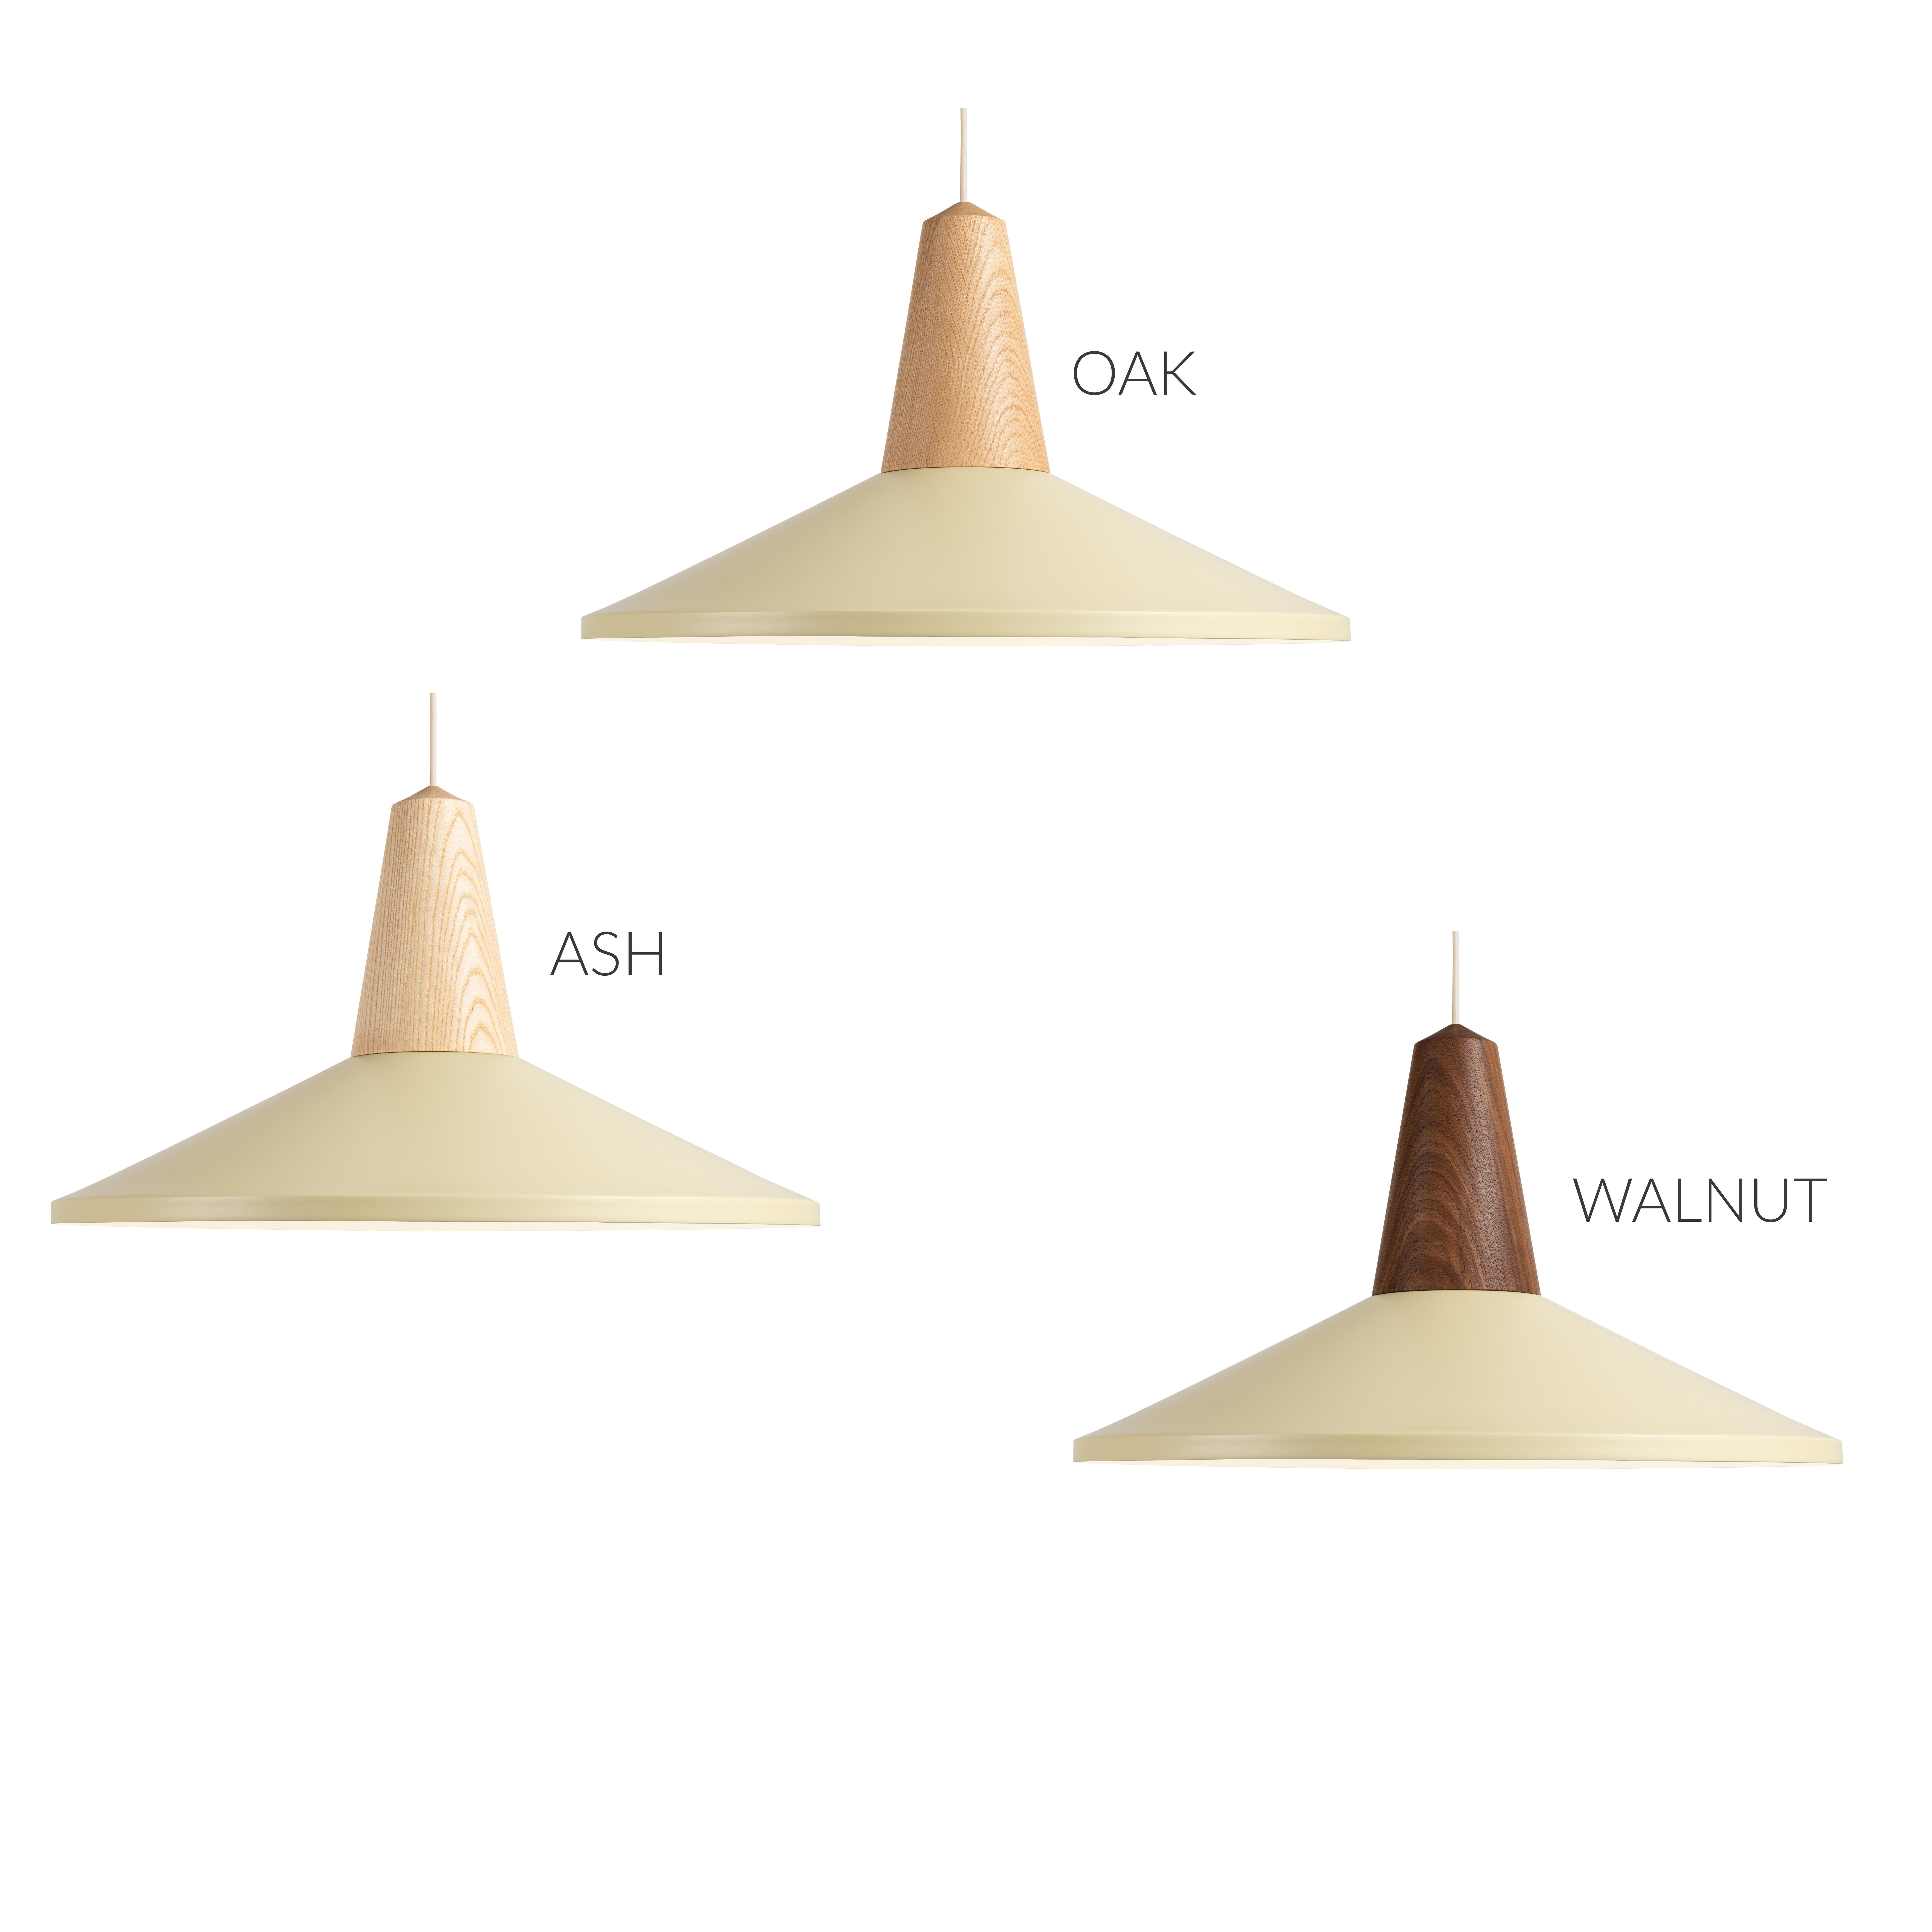 Eikon is made of certified wood and a lampshade that is attached simply with the help of magnets. The wooden socket of the lamp constitutes the minimalist and clean base of the lamp. The lampshade, made of steel or silicone and available in two